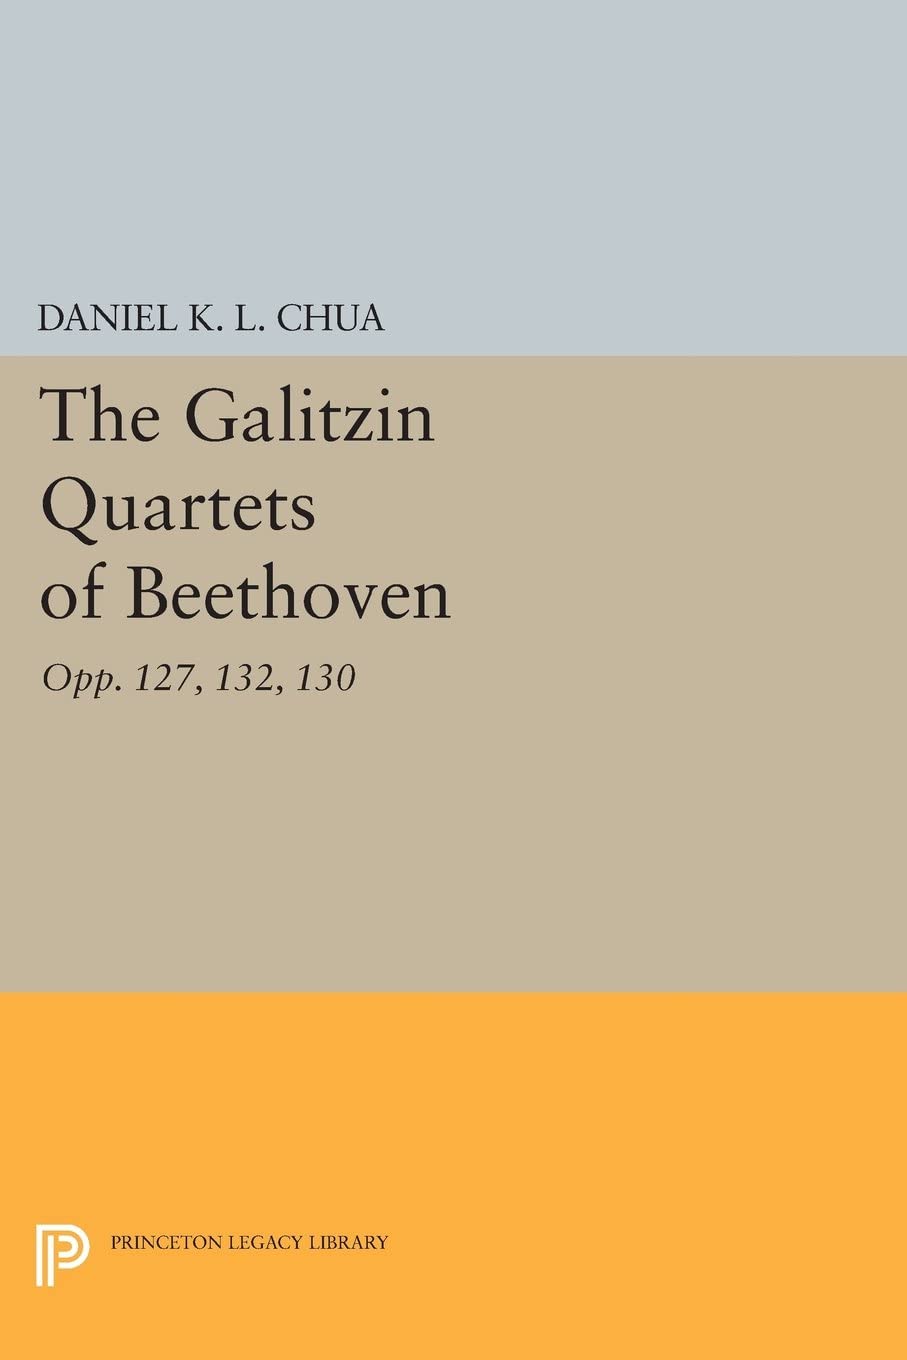 The Galitzin Quartets of Beethoven: Opp. 127, 132, 130 (Princeton Legacy Library, 320)